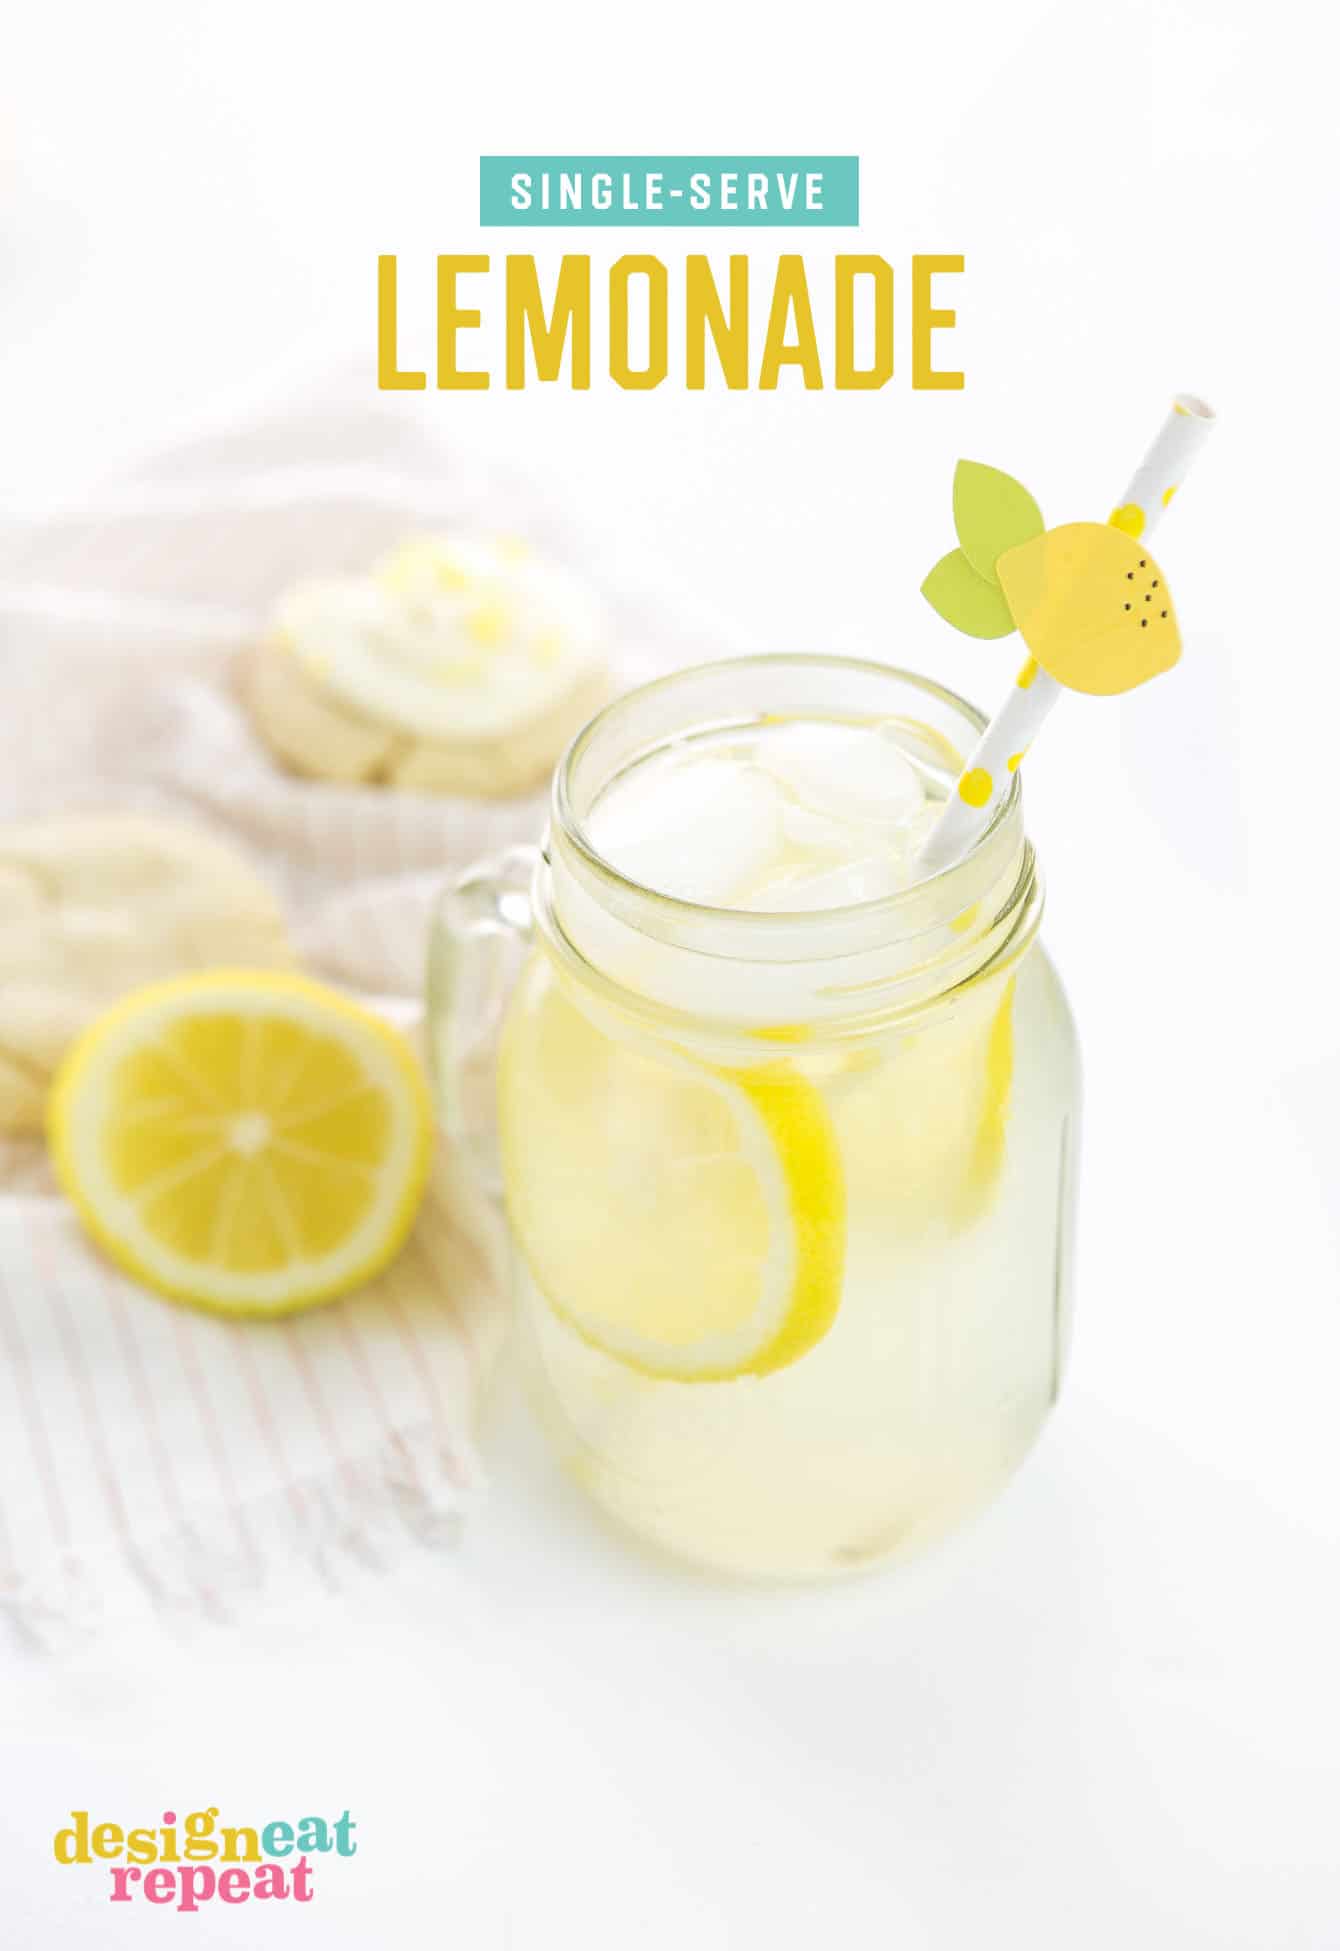 Mason jar of freshly squeezed lemonade with paper straw and lemon topper.